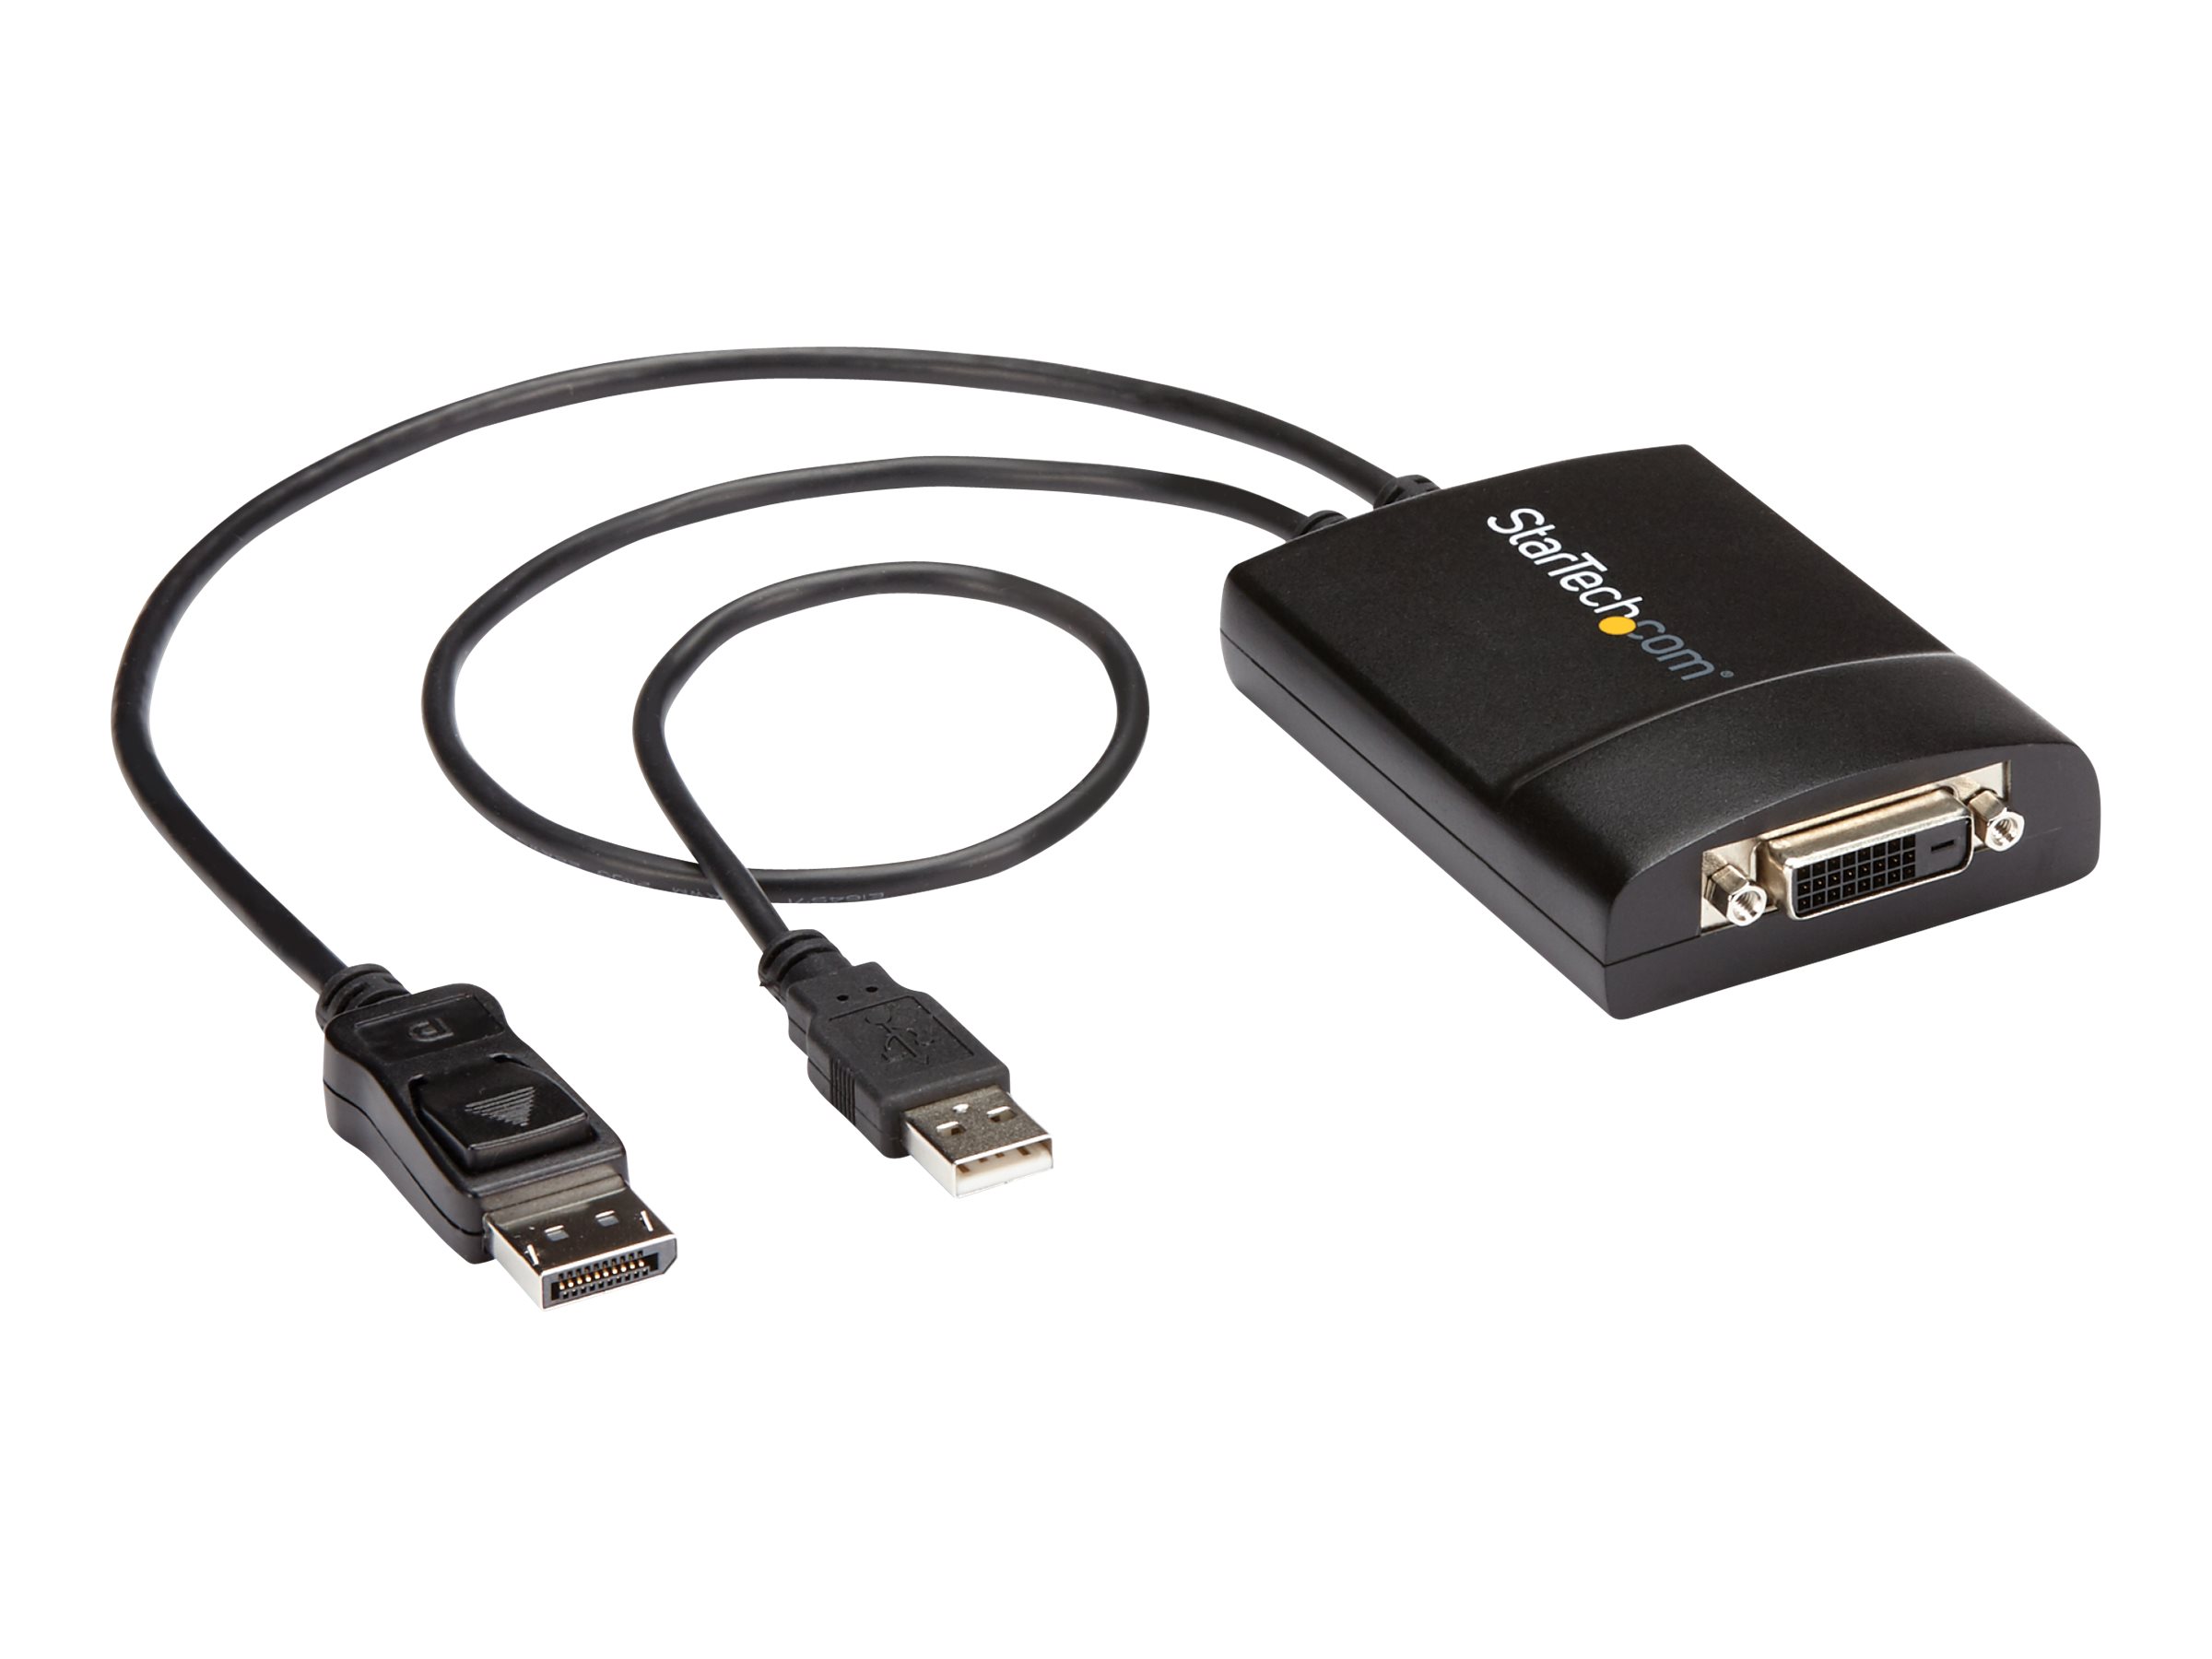 StarTech.com DisplayPort to DVI Adapter - Dual-Link - Active DVI-D Adapter for Your Monitor / Display - USB Powered - 2560x1600 (DP2DVID2)